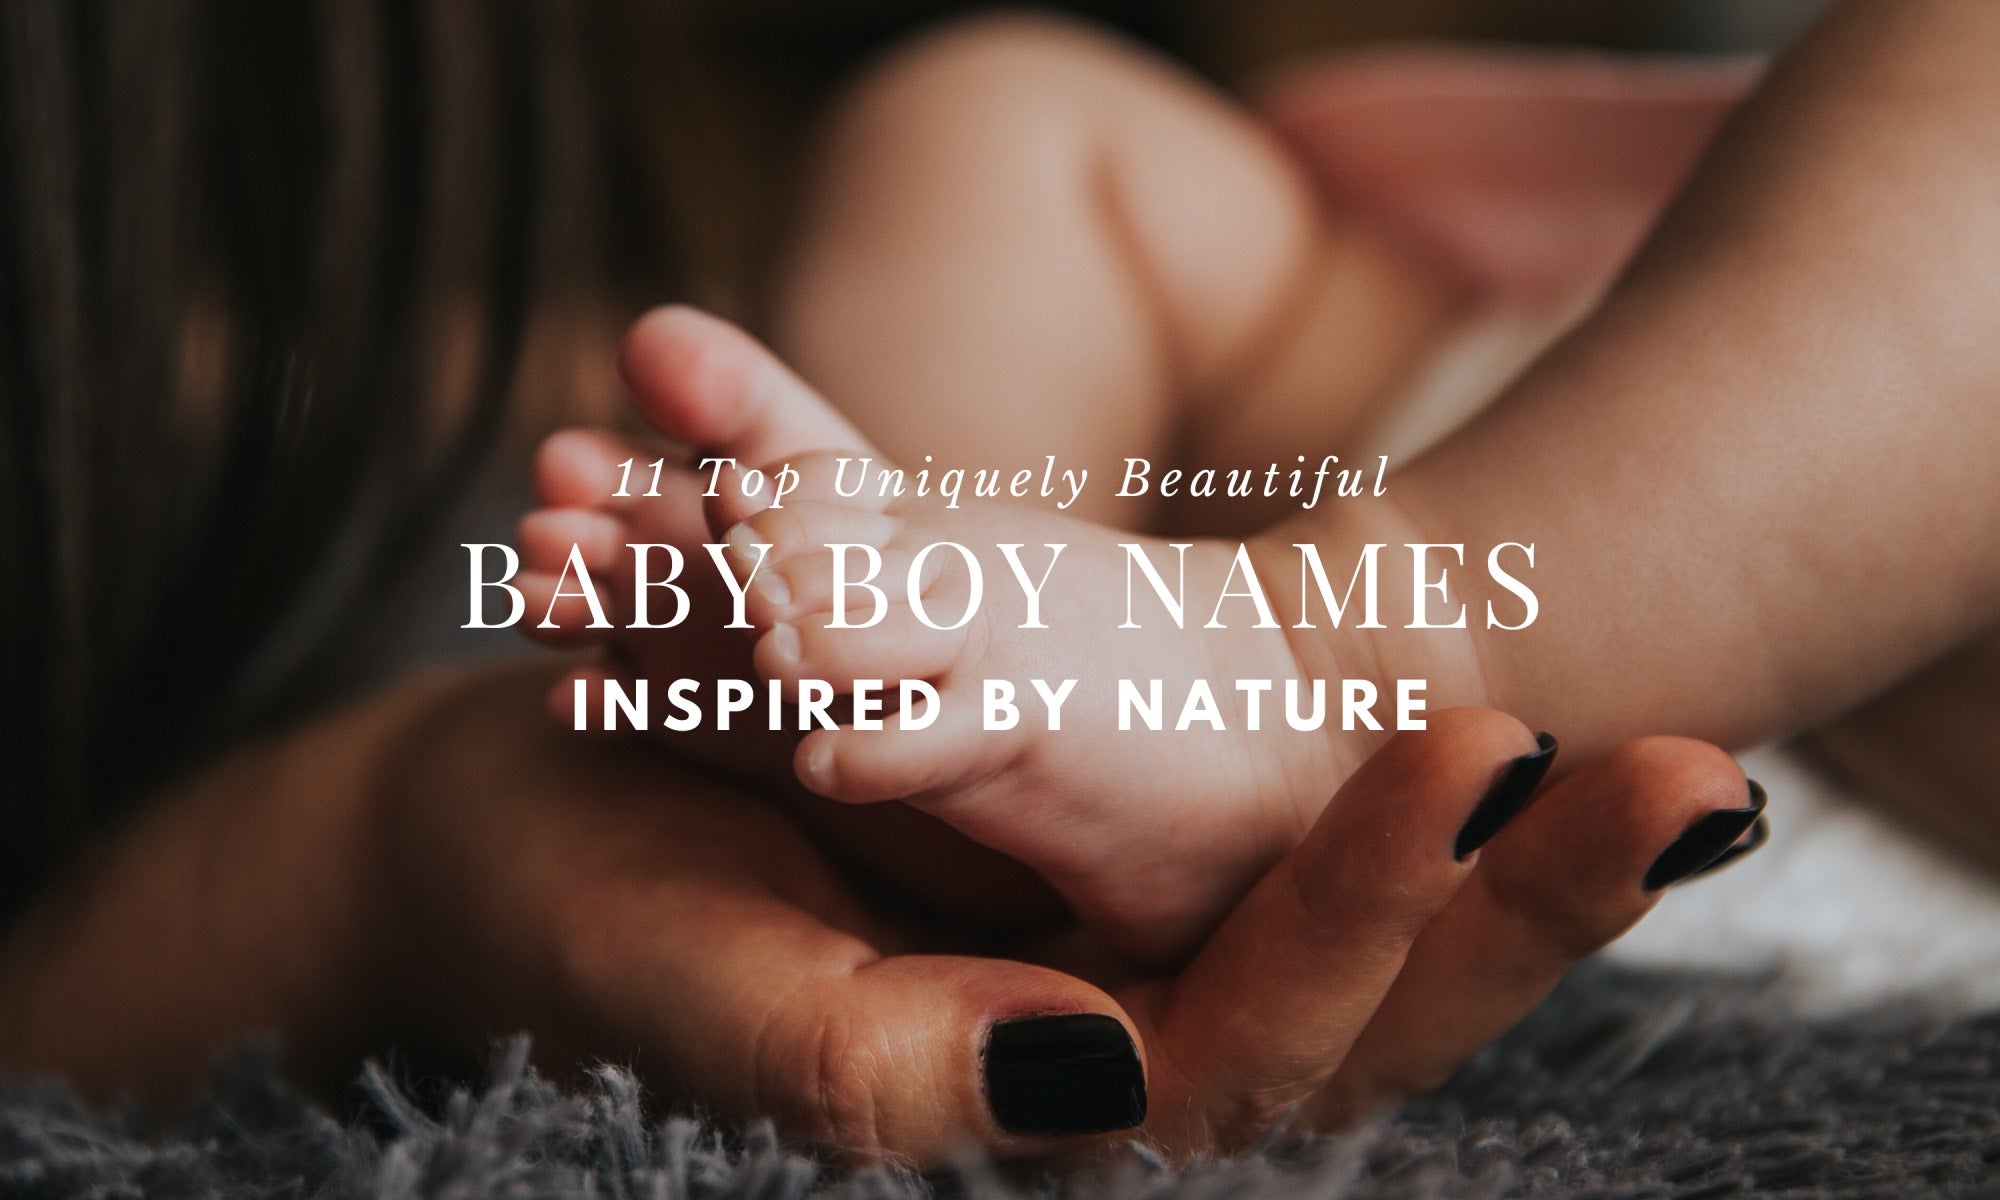 Our Top 11 Beautiful Nature-Inspired Baby Boys' Names (You May not Have Thought of)